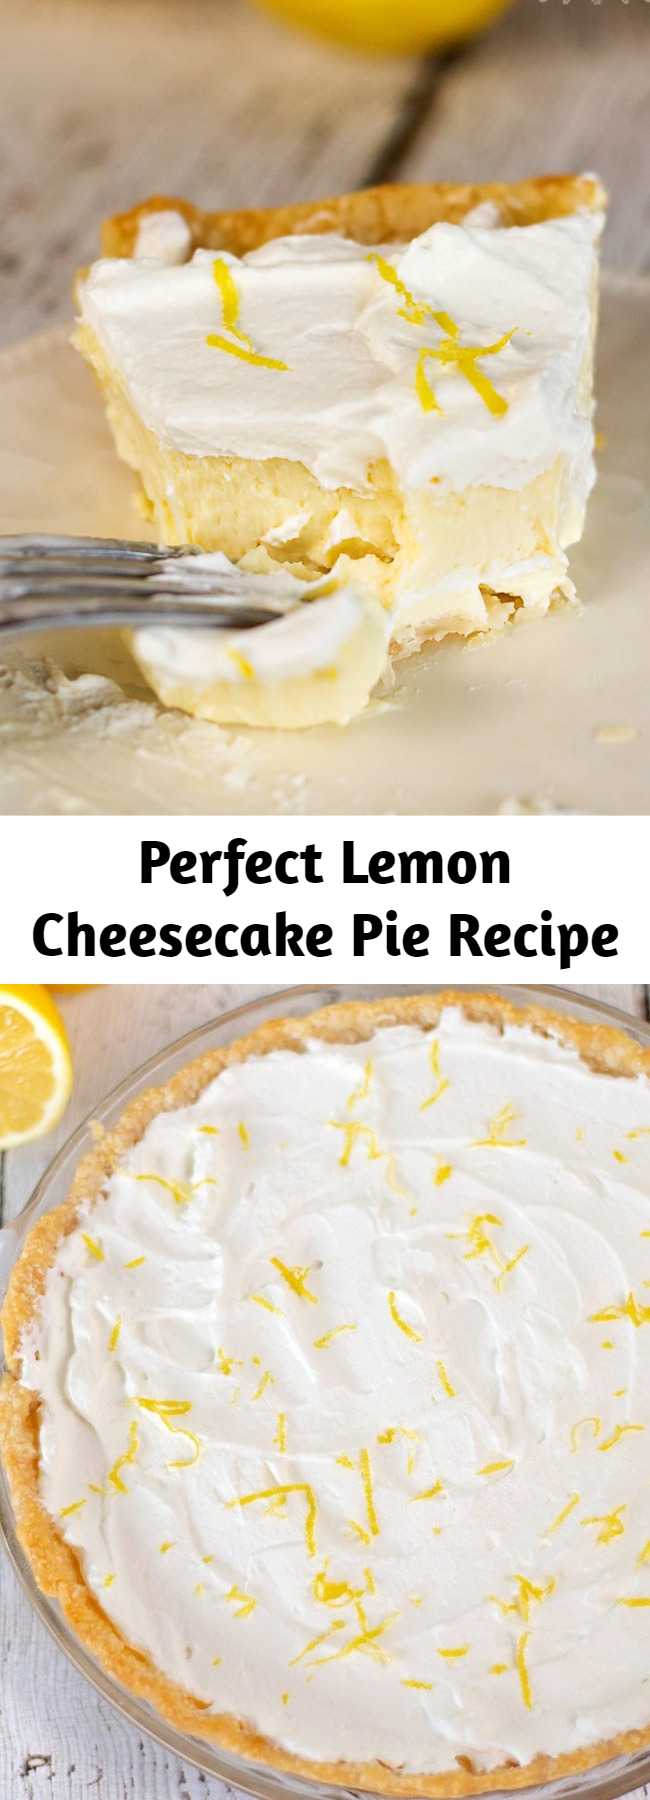 This Lemon Cheesecake Pie recipe is perfect for lemon lovers- so sweet, lemony and creamy, with just a tiny bit of tartness- yum!